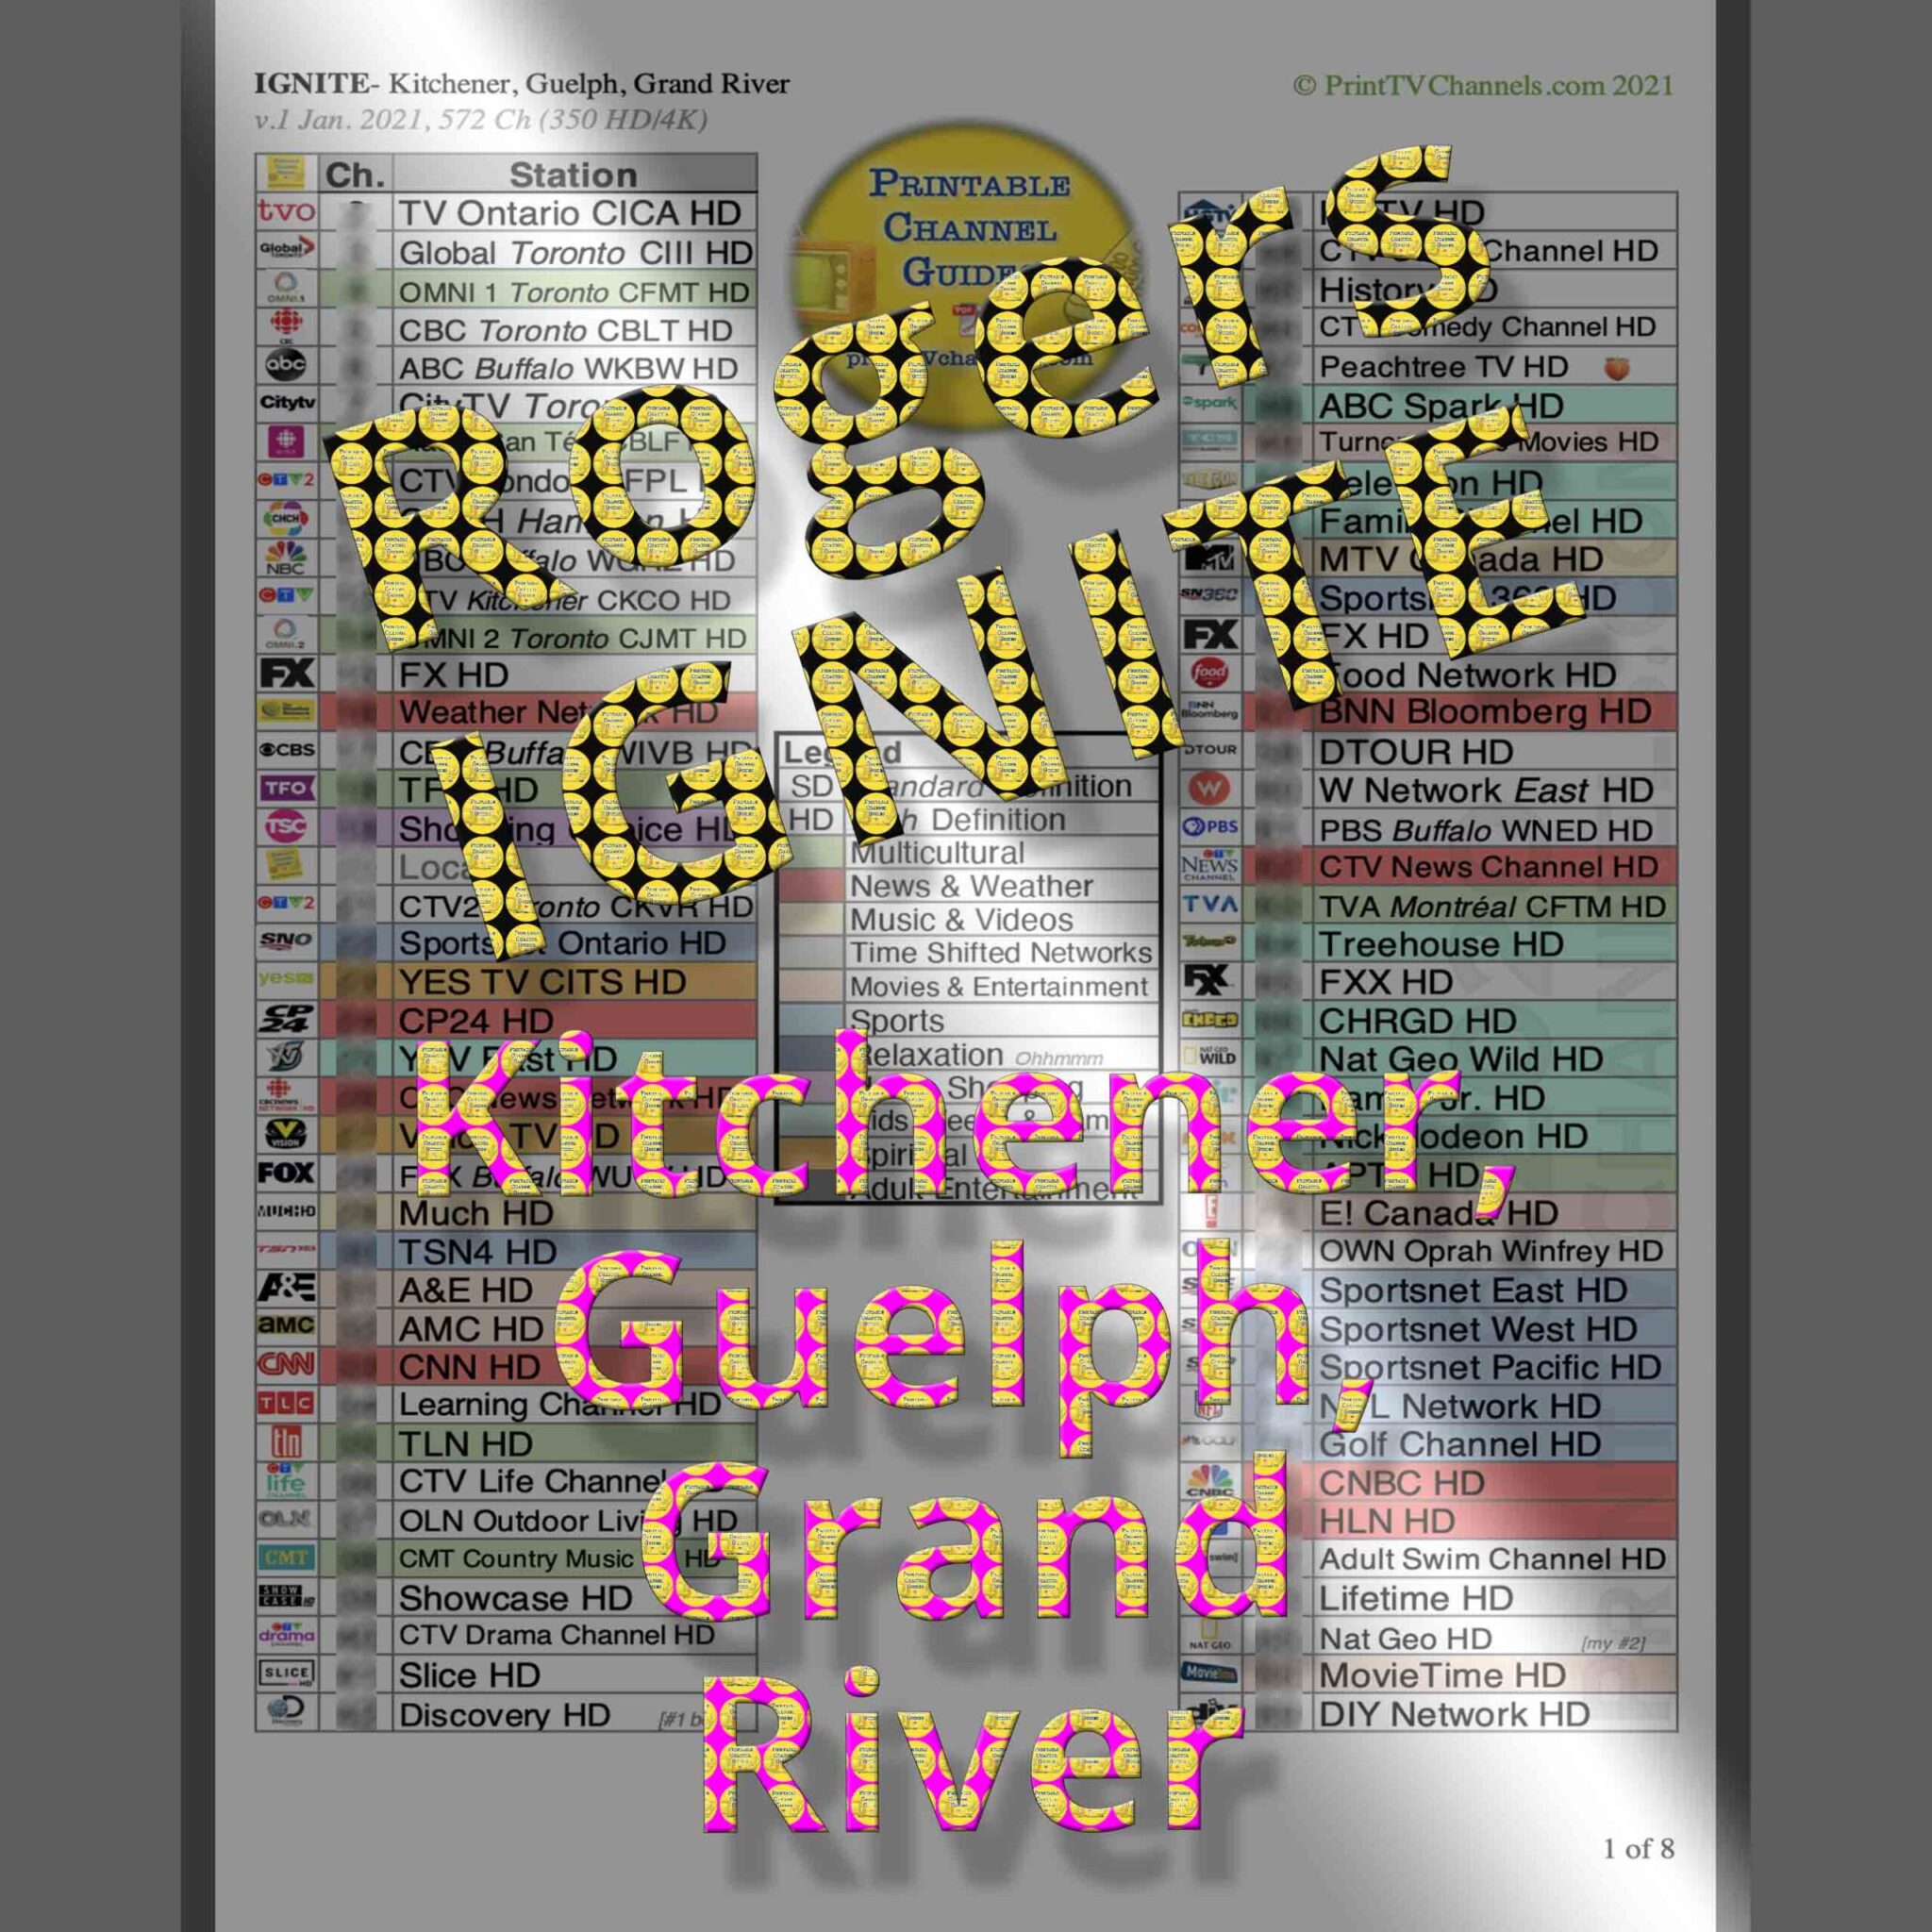 PREVIEW IMAGE:  Rogers IGNITE Channel Guide- KITCHENER, GUELPH, GRAND RIVER